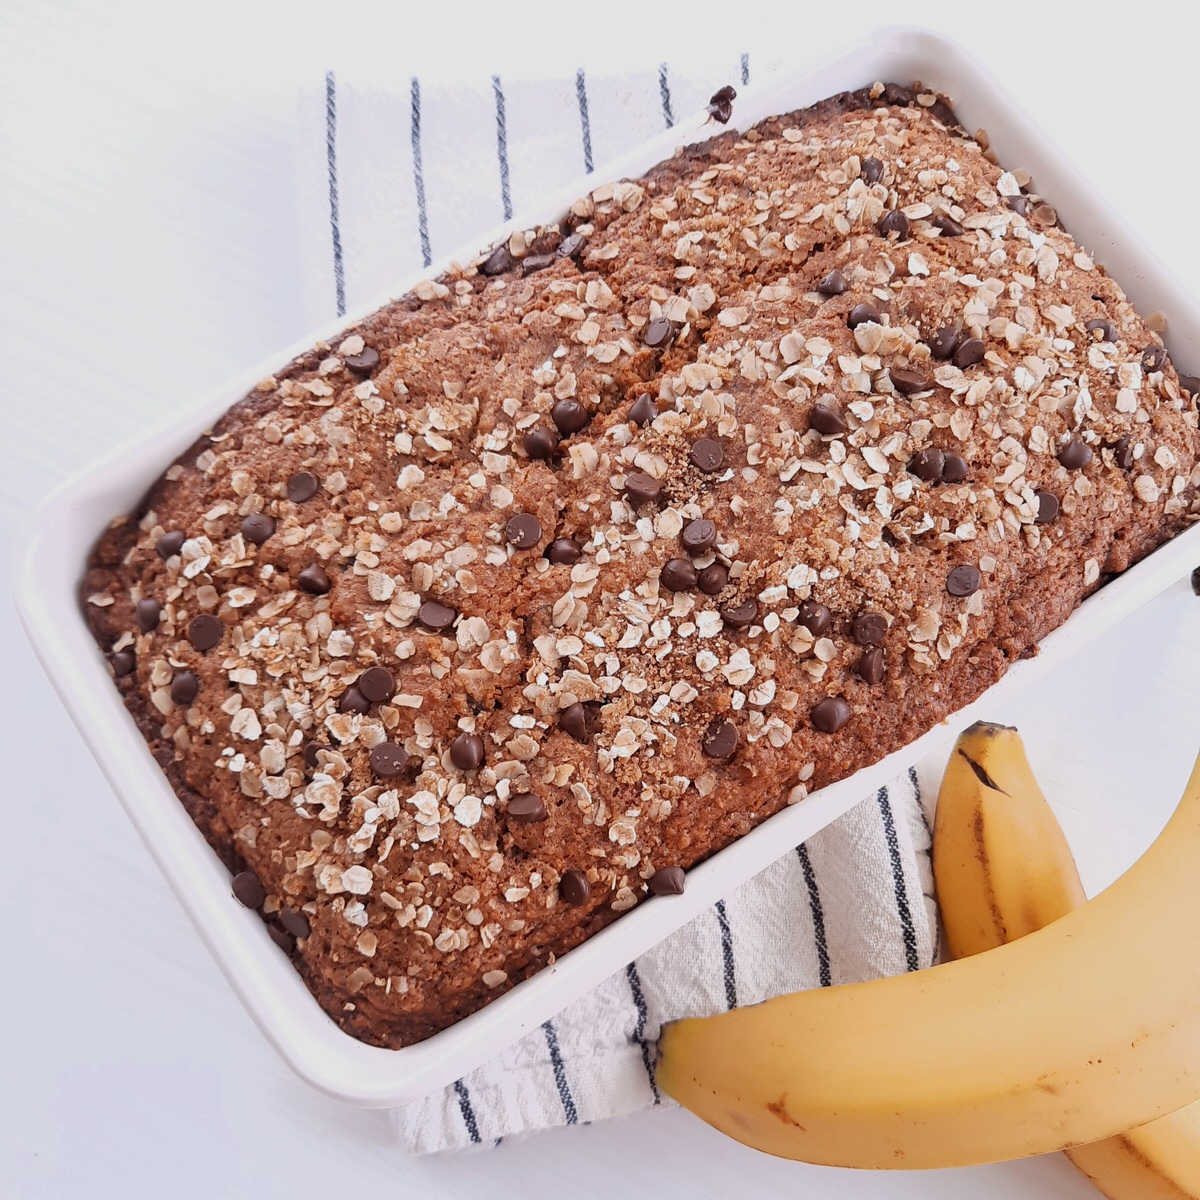 fresh baked banana bread in a white pan sits on a white countertop